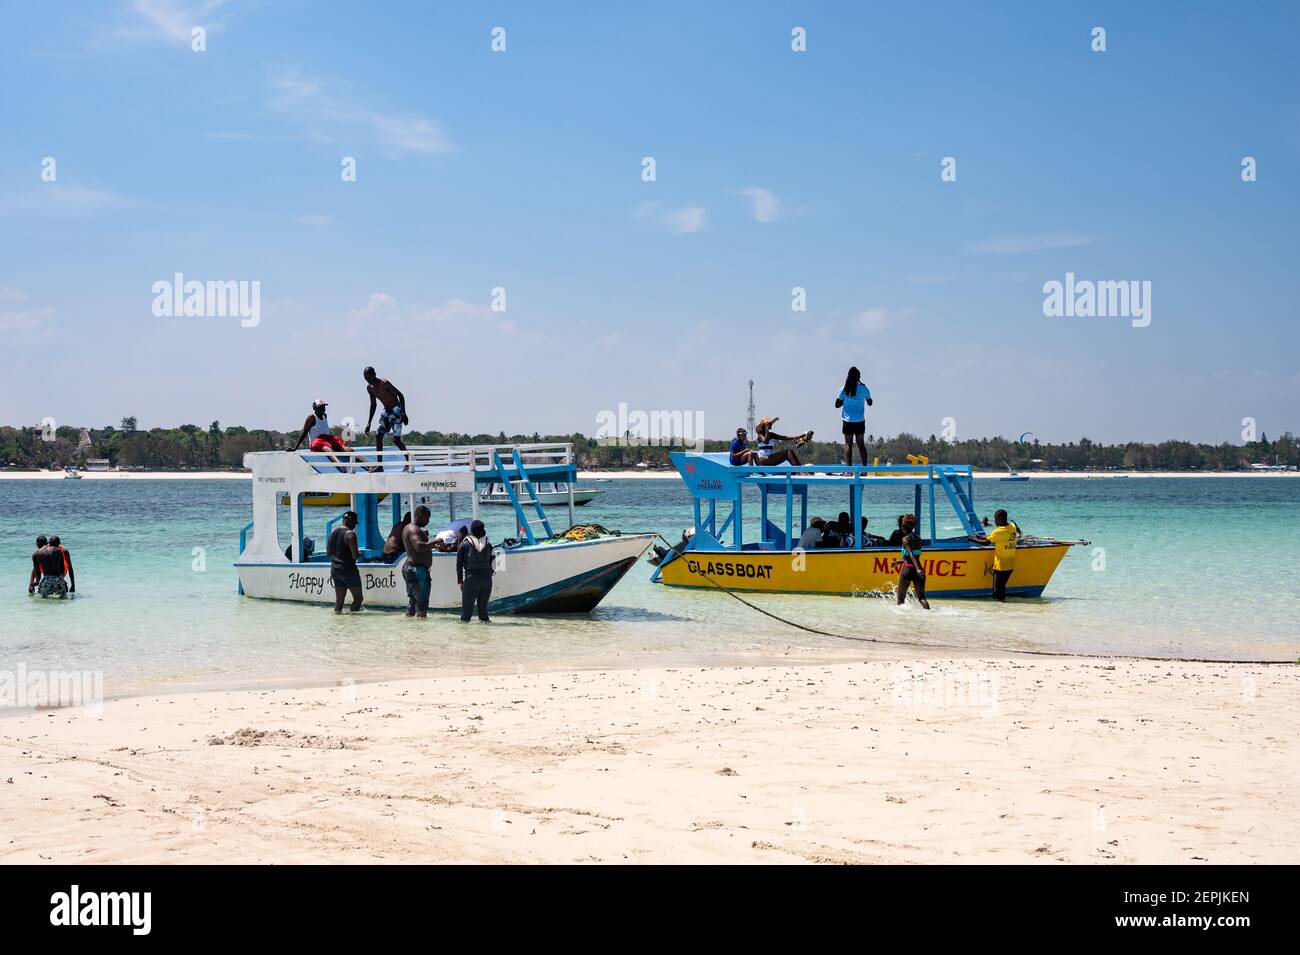 Glass bottom boats moored by a low tide sand bank with people on the beach, Diani, Kenya Stock Photo